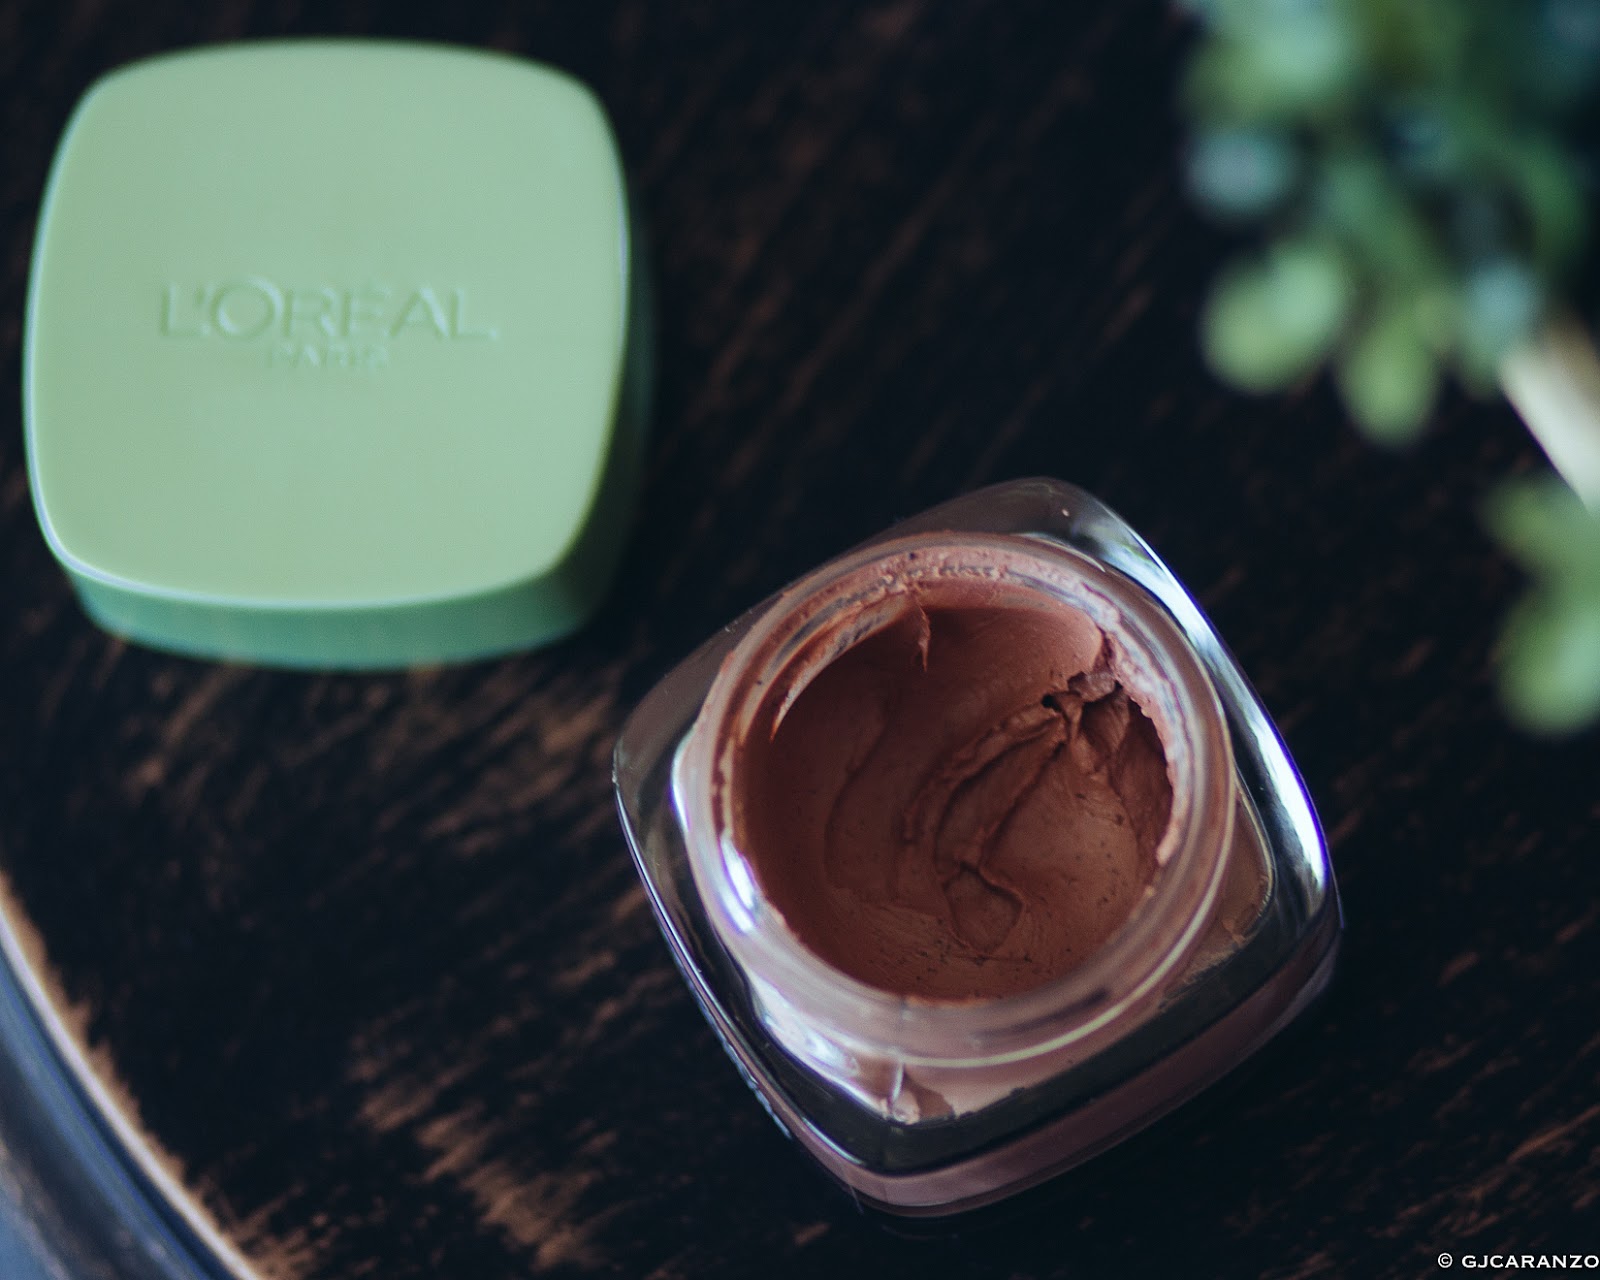 Loreal Pure-Clay Exfoliate & Refining Face Mask Product Review